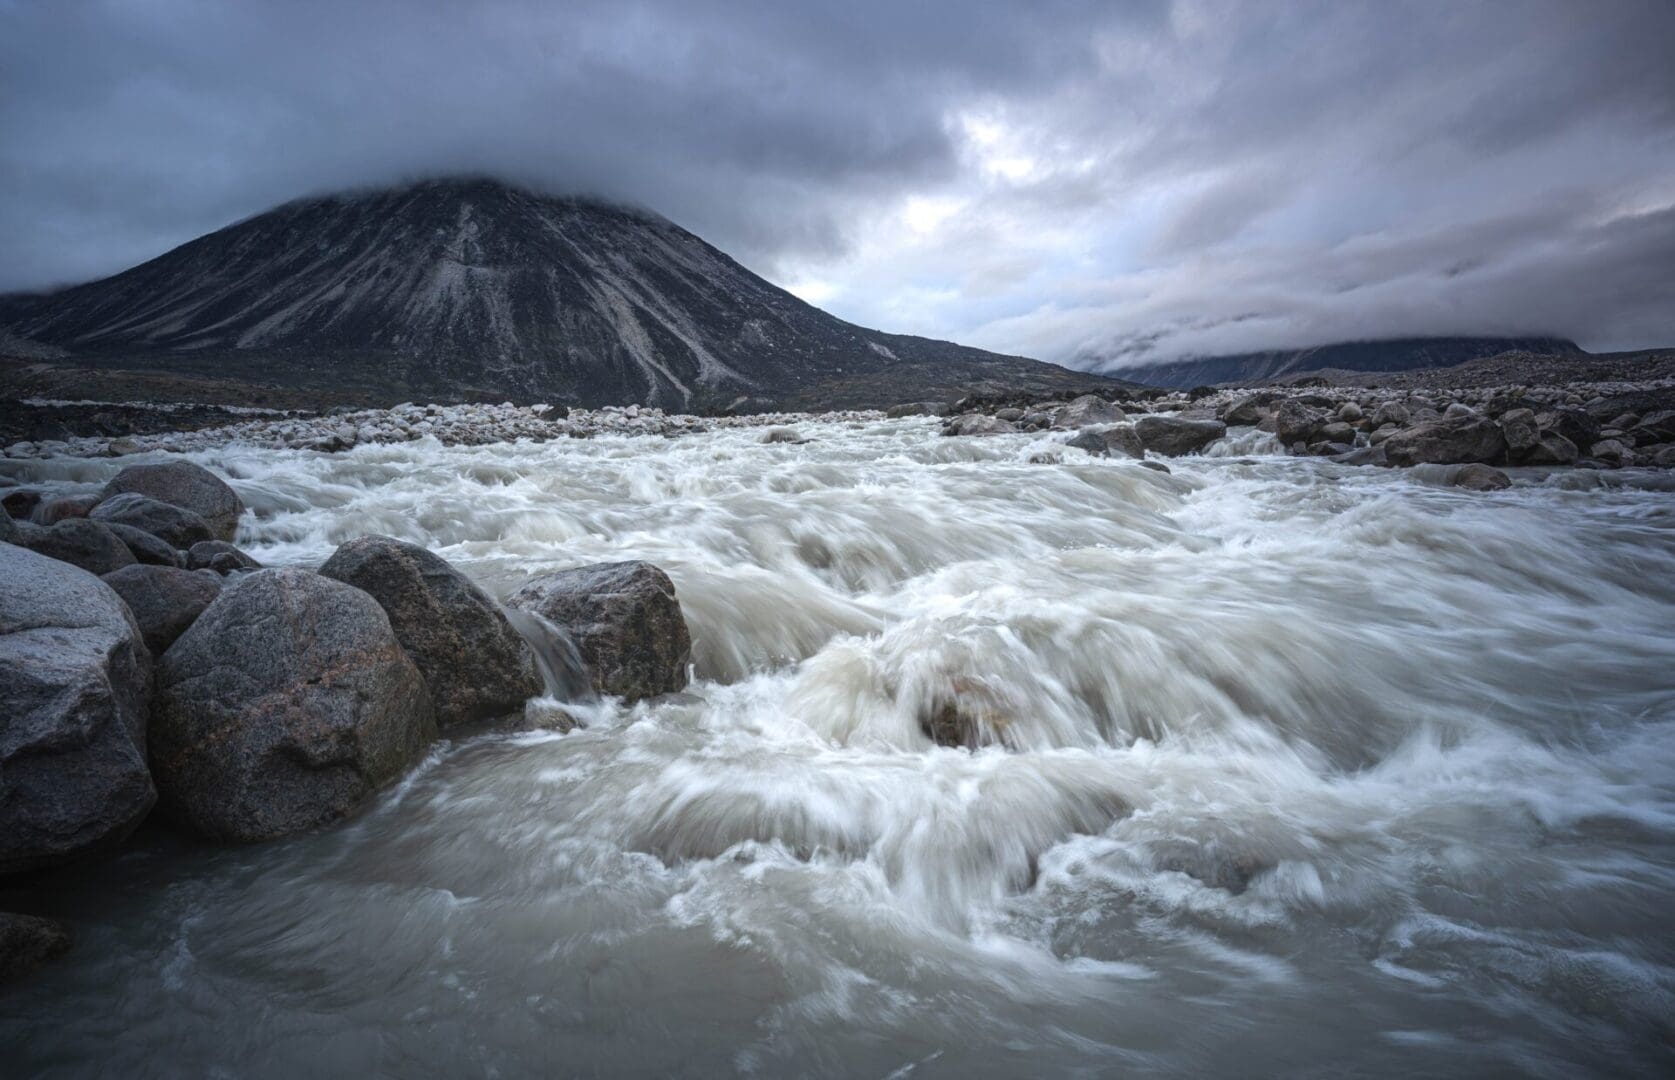 Fast-flowing river with rocks and mountain.